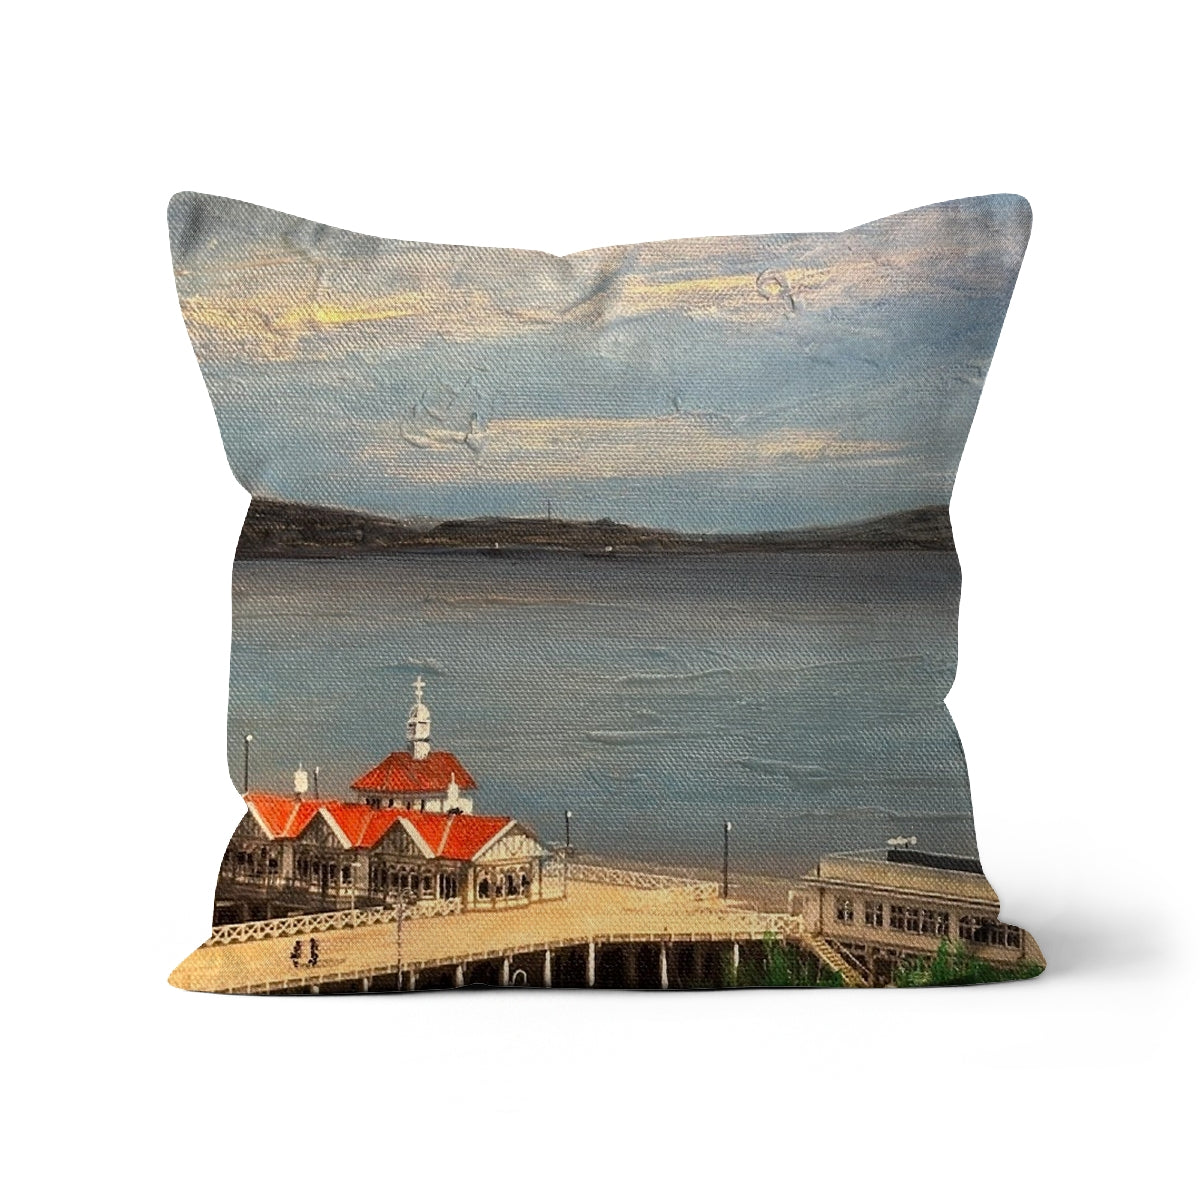 Looking From Dunoon Art Gifts Cushion-Cushions-River Clyde Art Gallery-Faux Suede-18"x18"-Paintings, Prints, Homeware, Art Gifts From Scotland By Scottish Artist Kevin Hunter